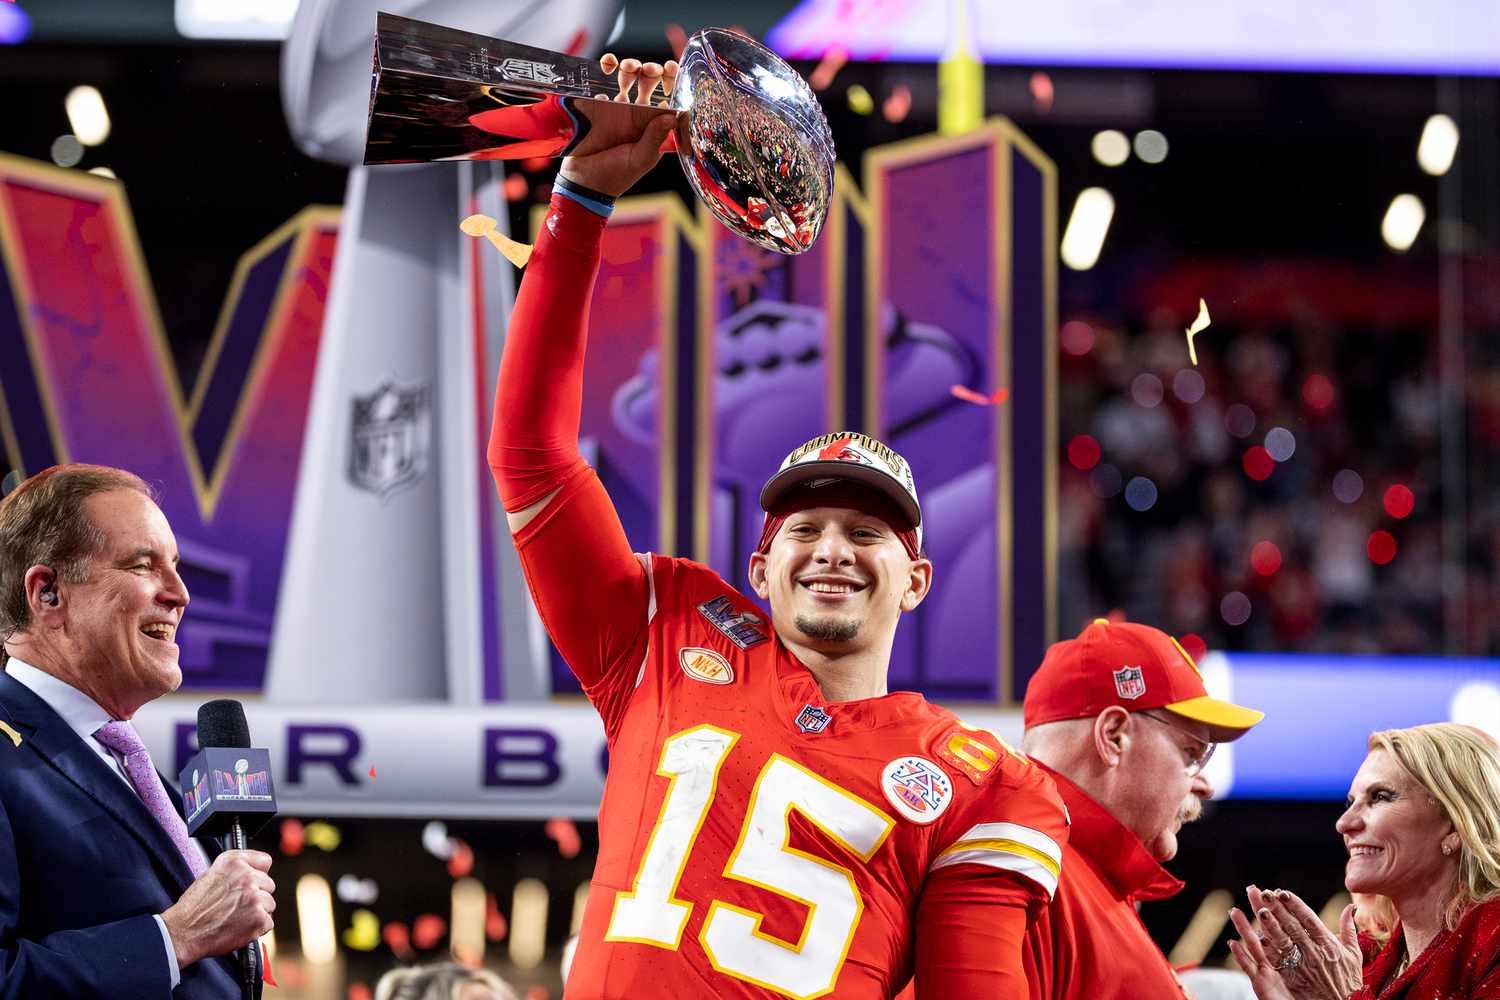 Patrick Mahomes' One-Year-Old Son, Bronze, Shows Early Love for March Madness